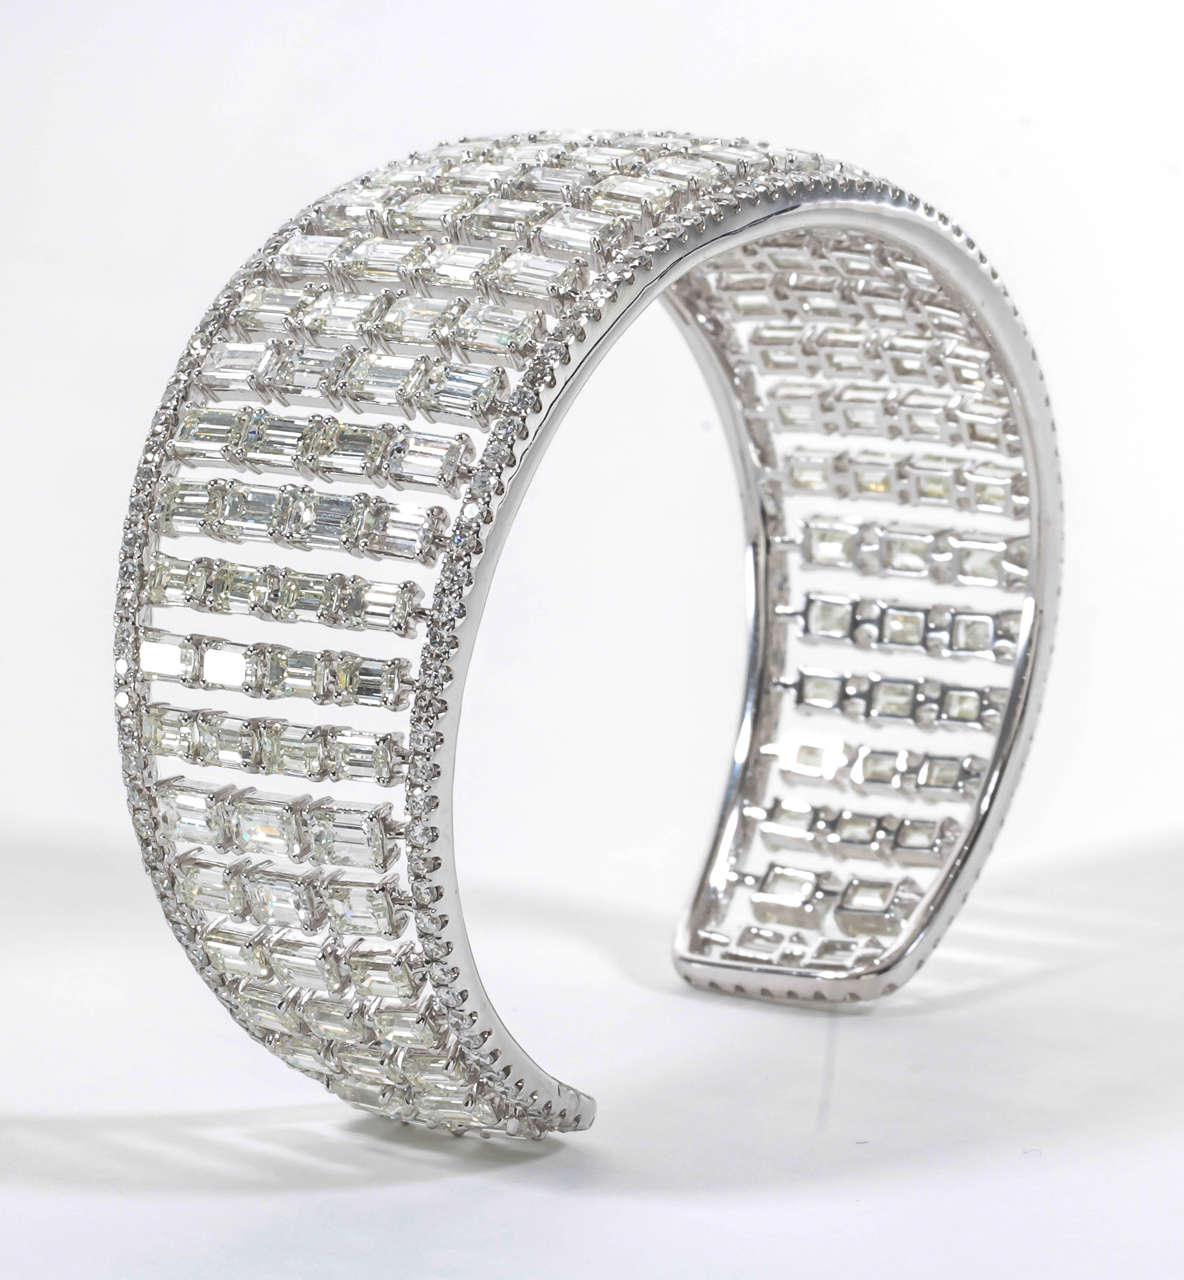 A rare find and exquisite design!

28.21 carats of emerald and round brilliant cut diamonds set in 18k white gold.

The bangle measures an inch at its widest point before graduating down on each side.